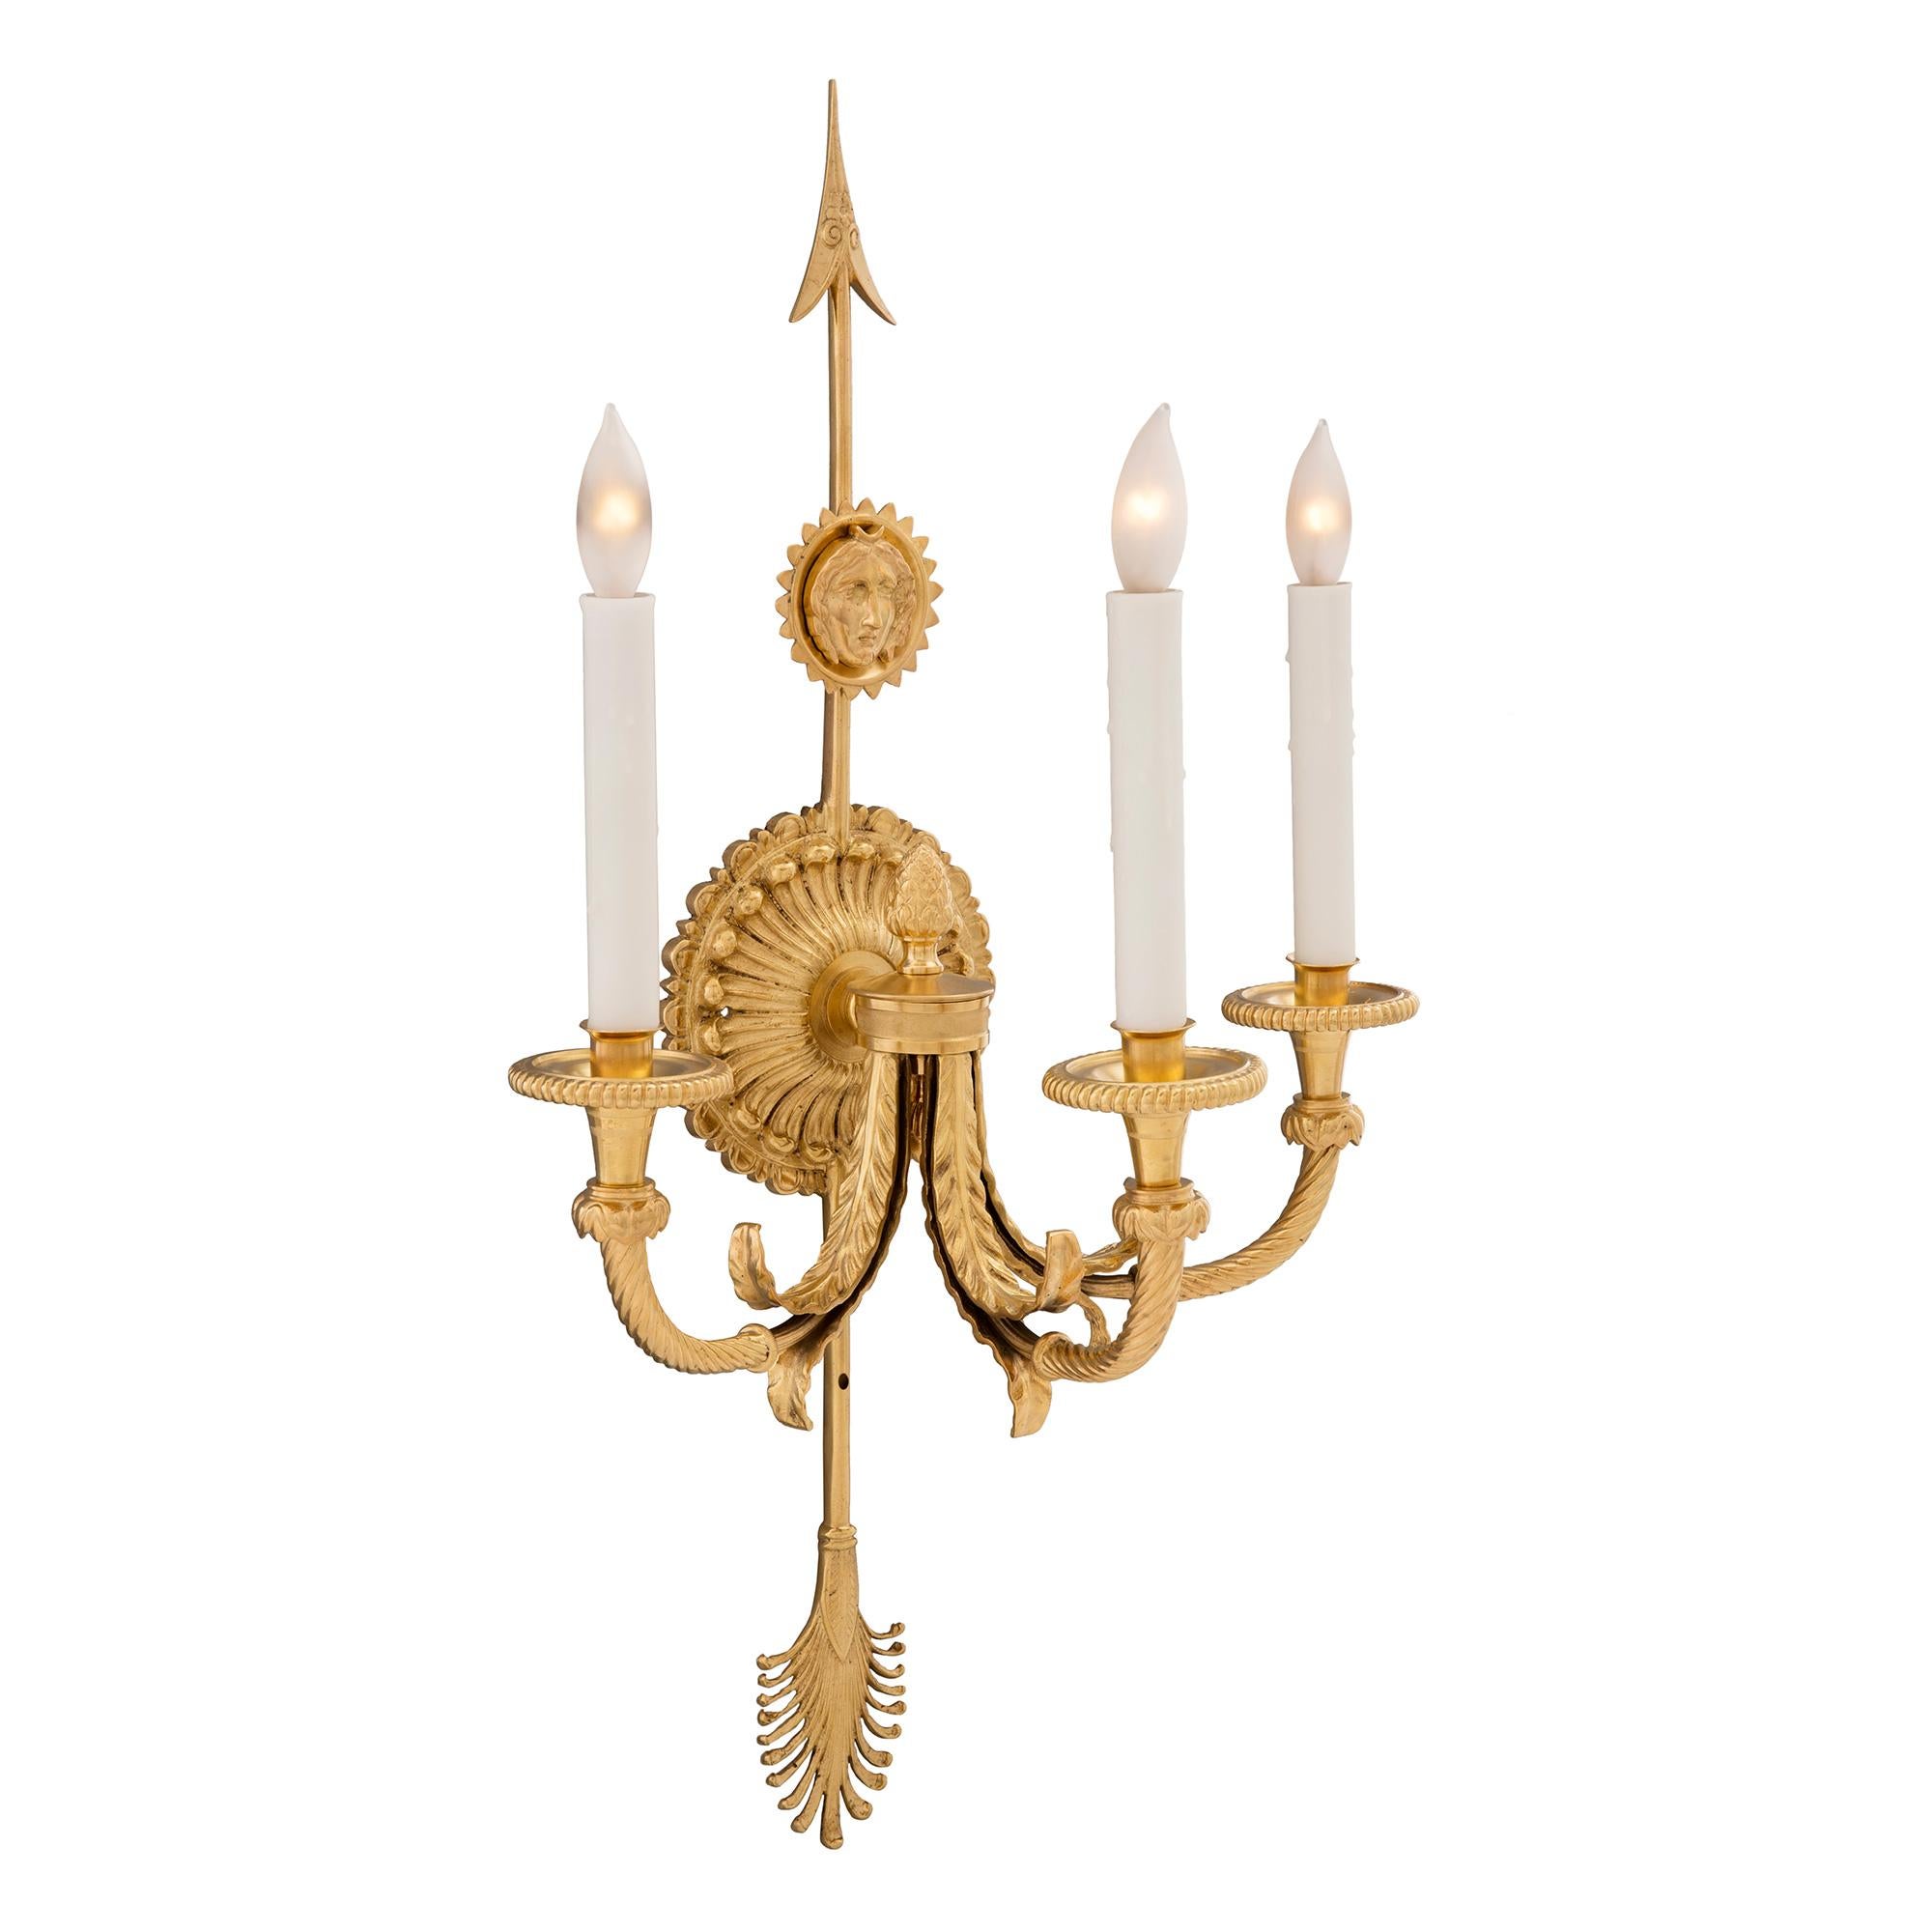 A striking pair of French 19th century neo-classical st. ormolu three arm sconces. Each sconce is centered by a beautiful bottom palmette. At the centers are most decorative circular reeded foliate reserves with acorn finials from where the three